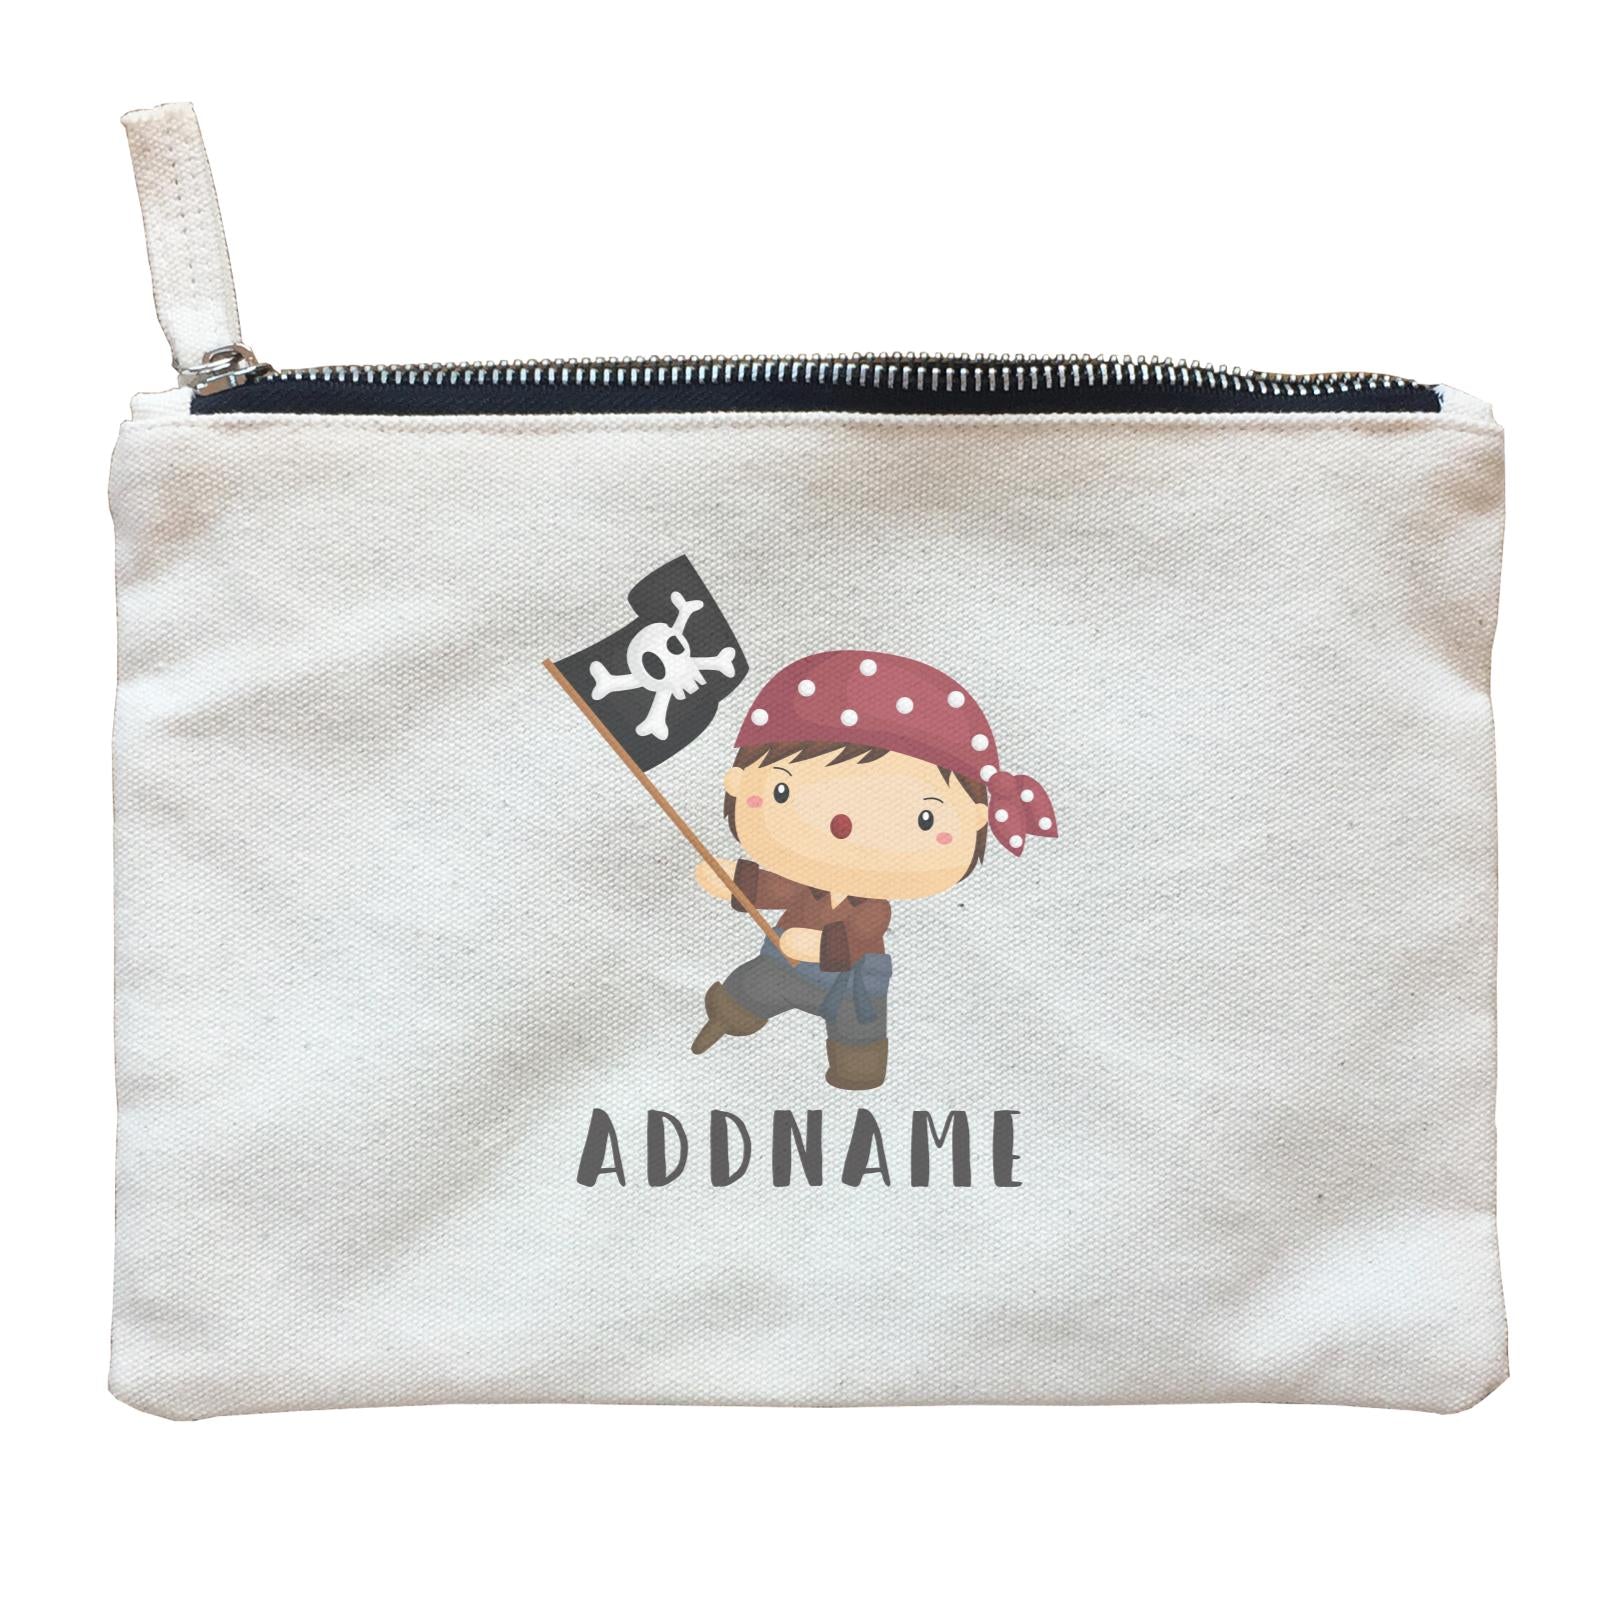 Birthday Pirate Boy Crew Holding Pirate Flag Addname Zipper Pouch